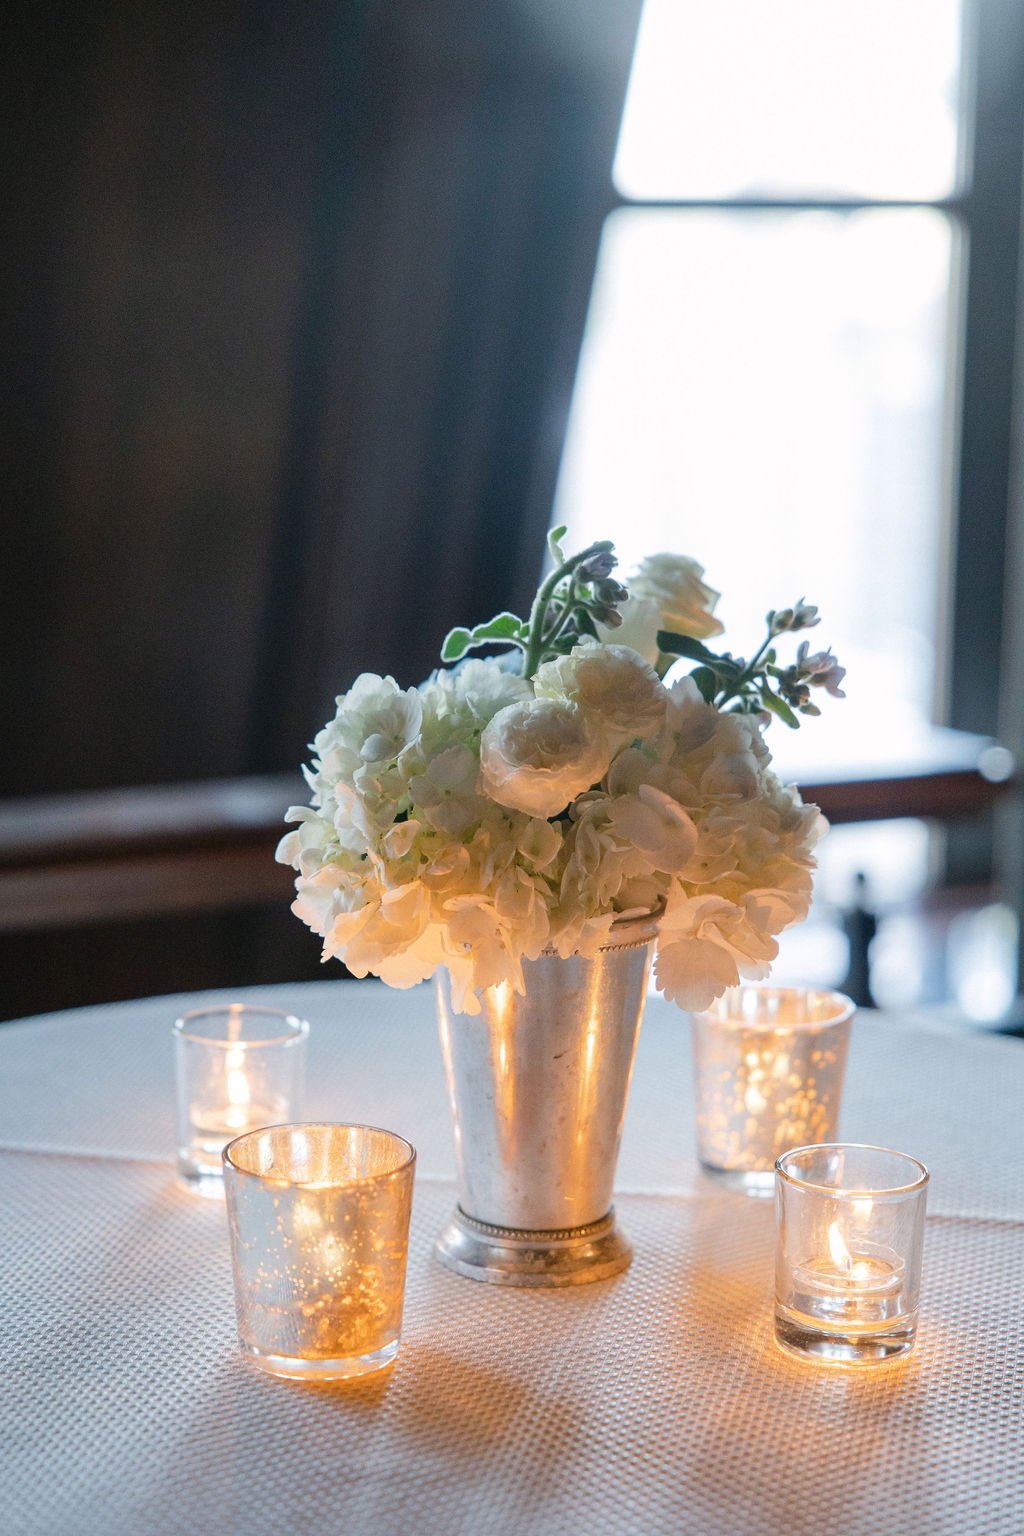 Luxurious Rehearsal Dinner at The Crescent Club